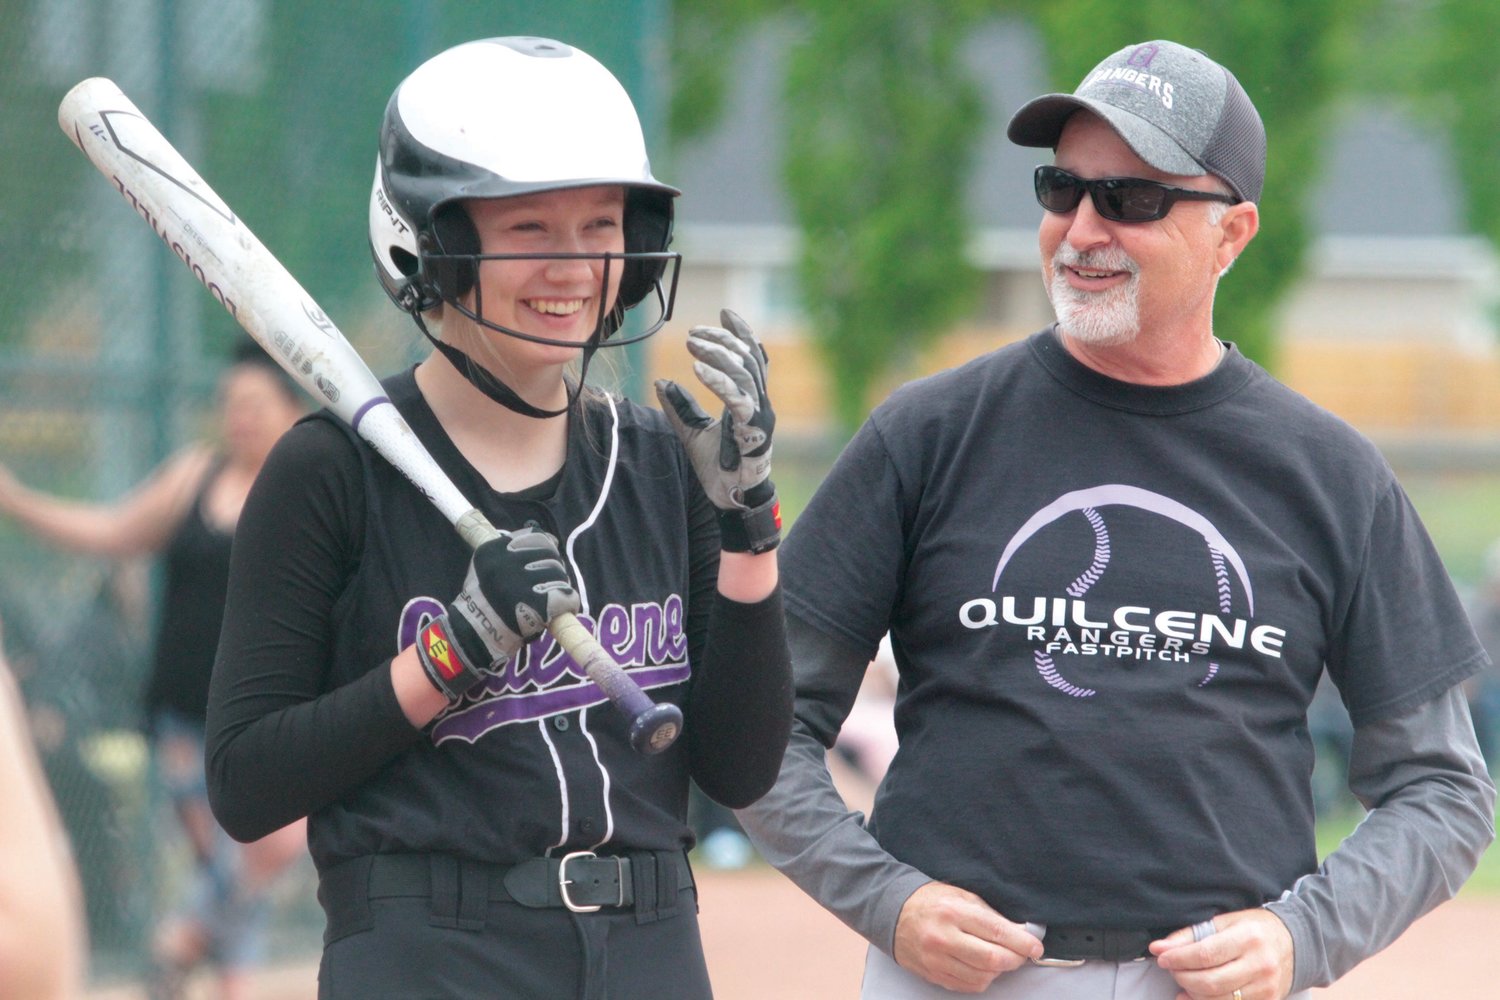 Emery Reimann shares a laugh with Ranger Coach Mark Thompson before an at-bat against the Hornets.